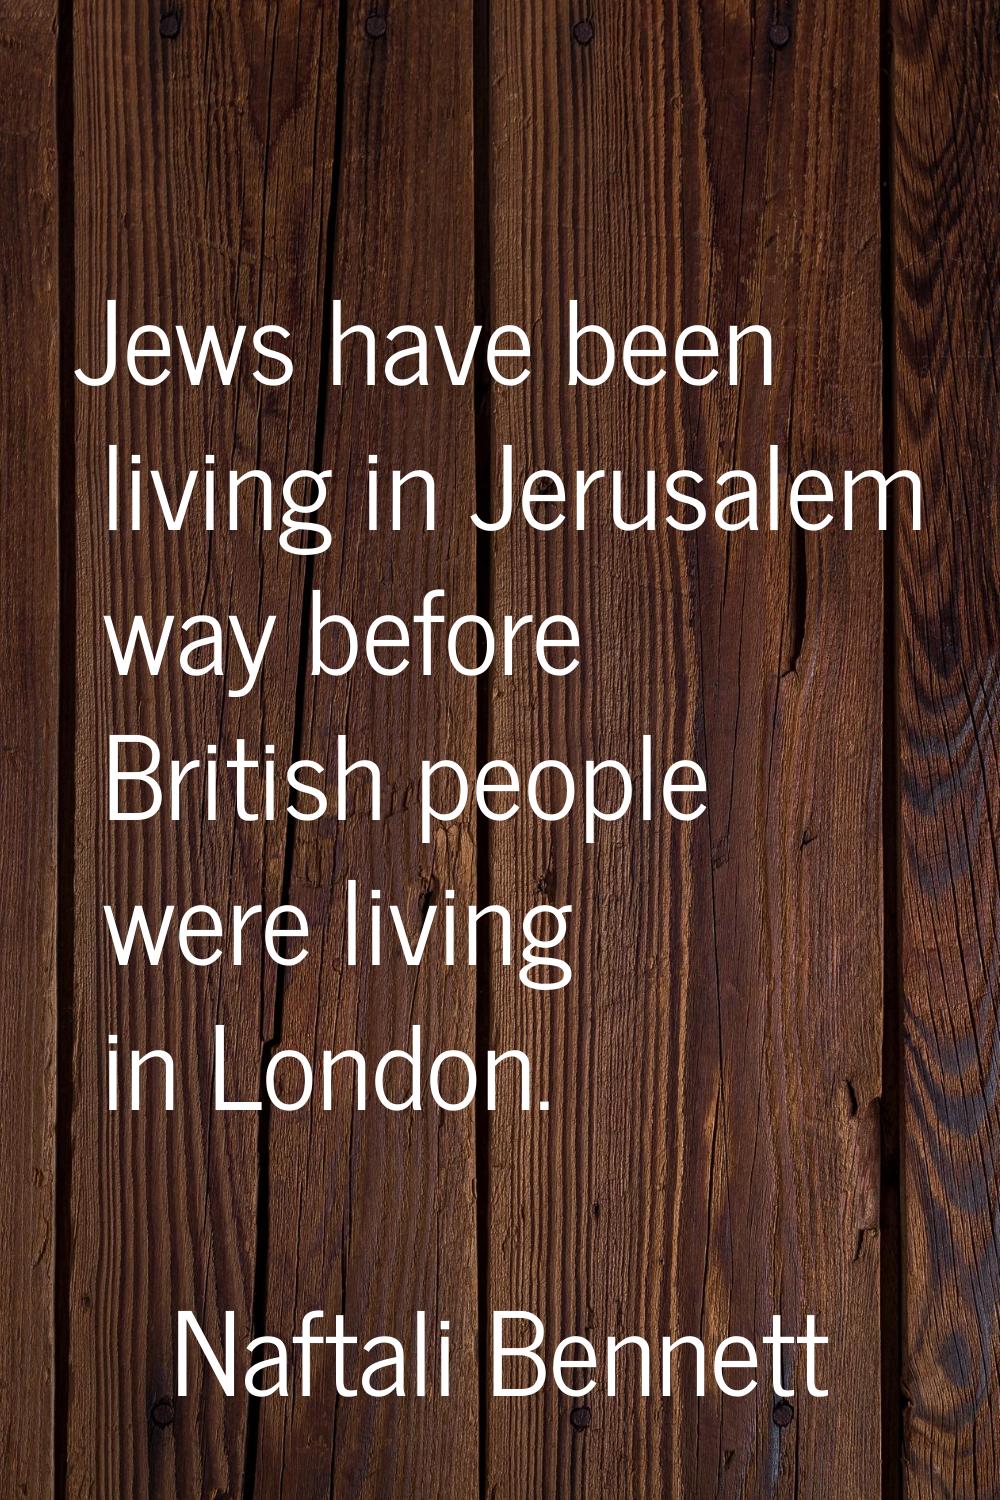 Jews have been living in Jerusalem way before British people were living in London.